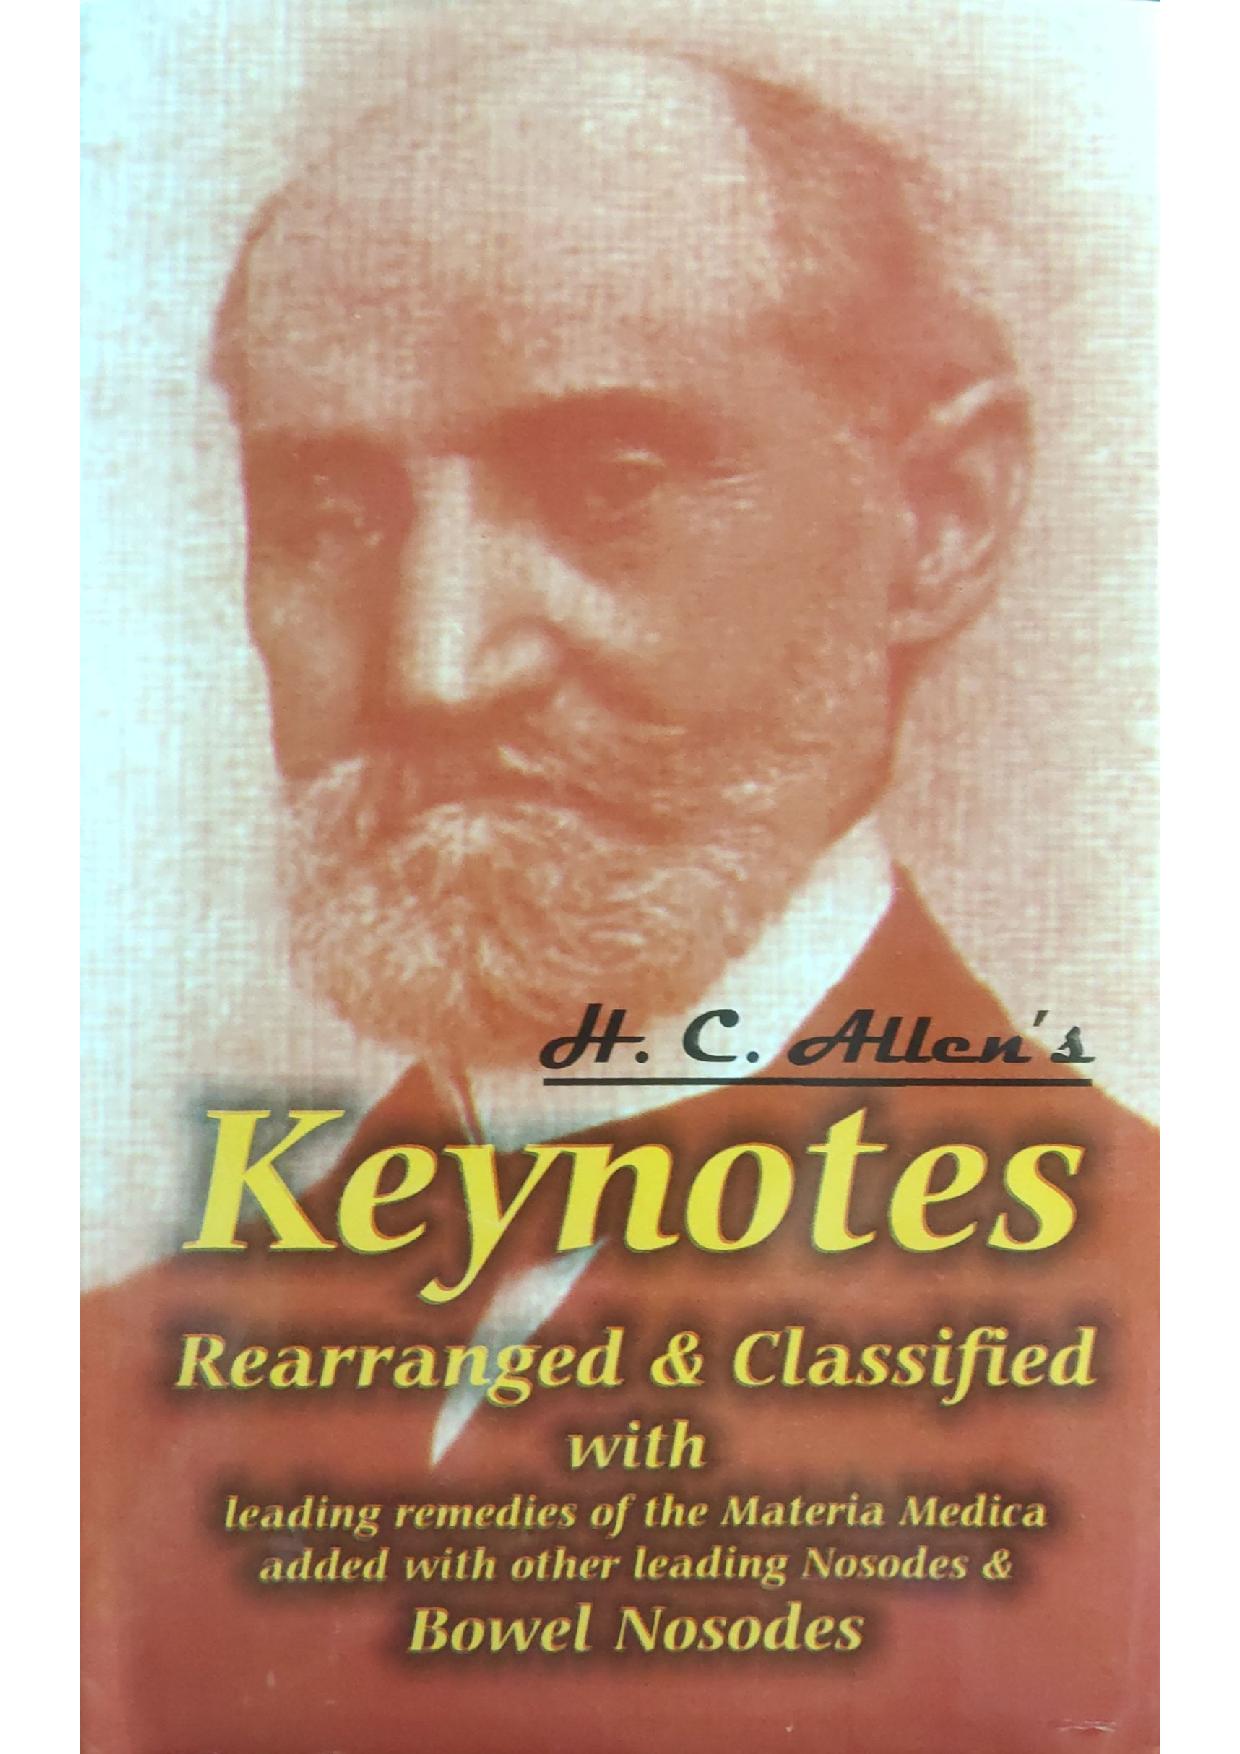 keynotes-rearranged-and-classified-with-leading-remedies-of-the-materia-medicabowel-nosod